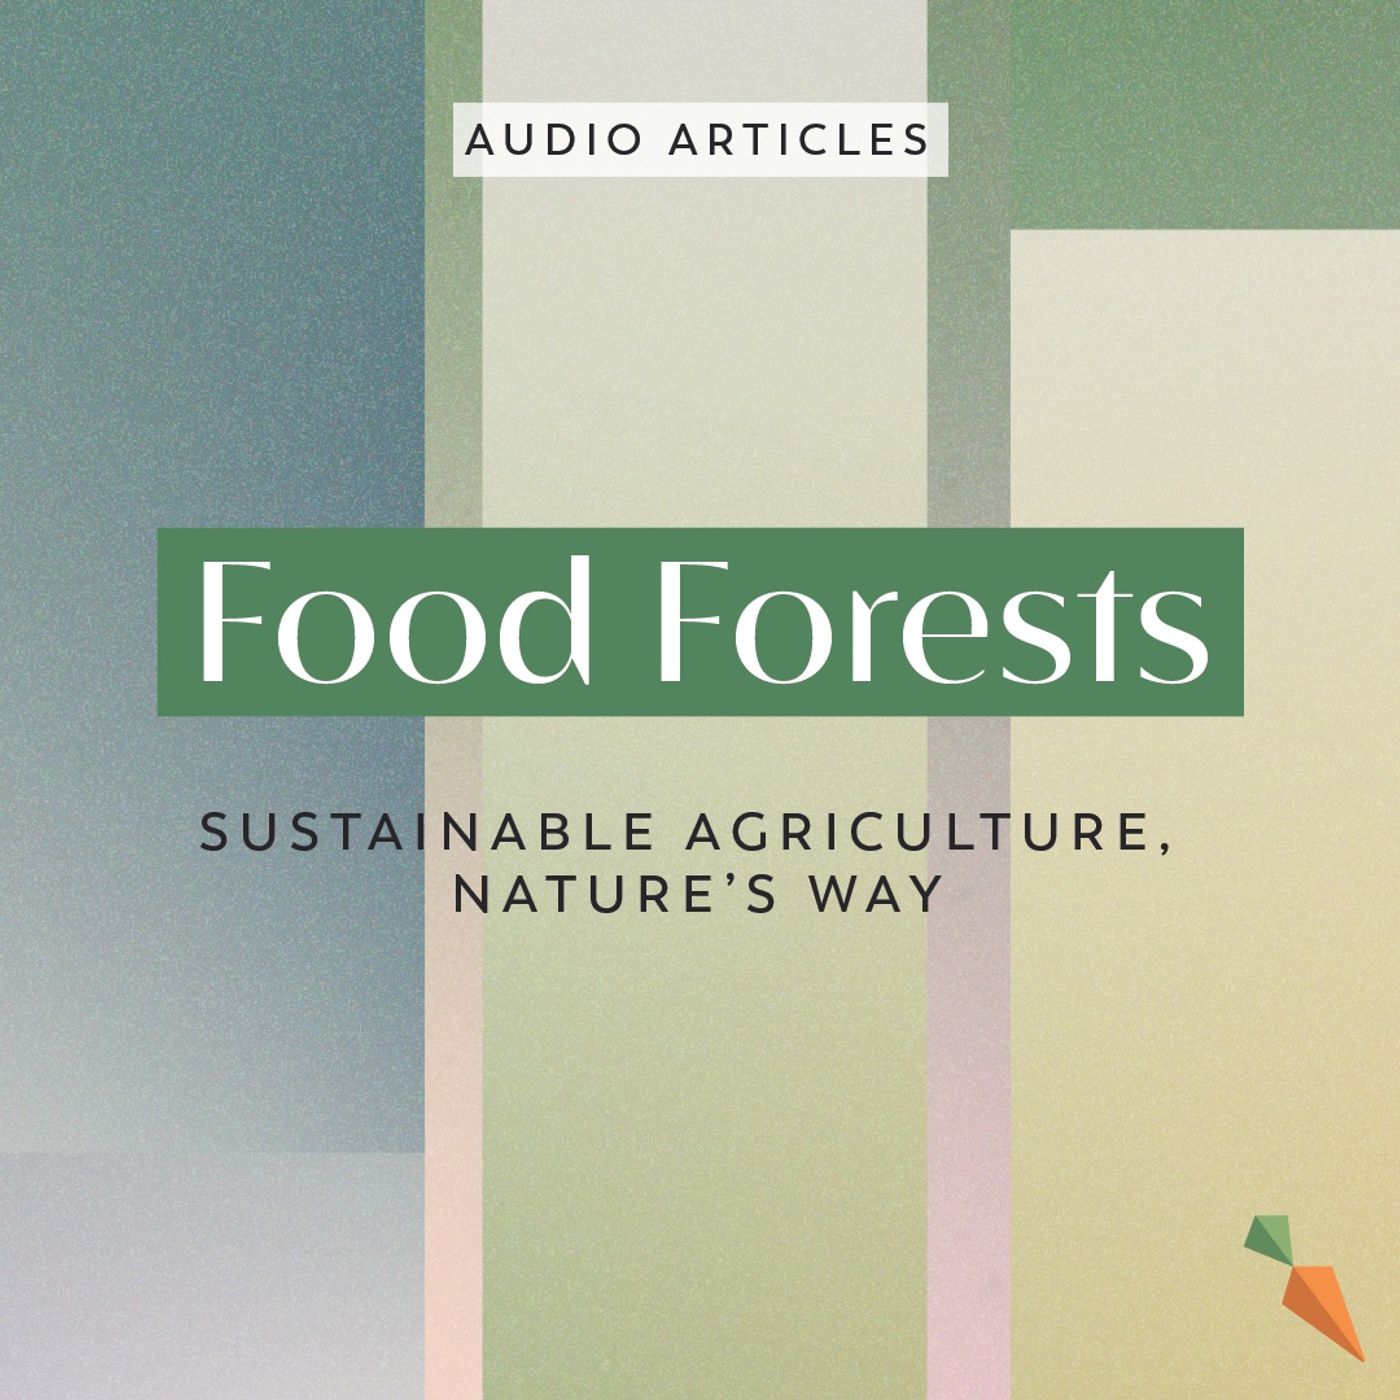 Food Forests: Sustainable Agriculture, Nature’s Way | FoodUnfolded AudioArticle